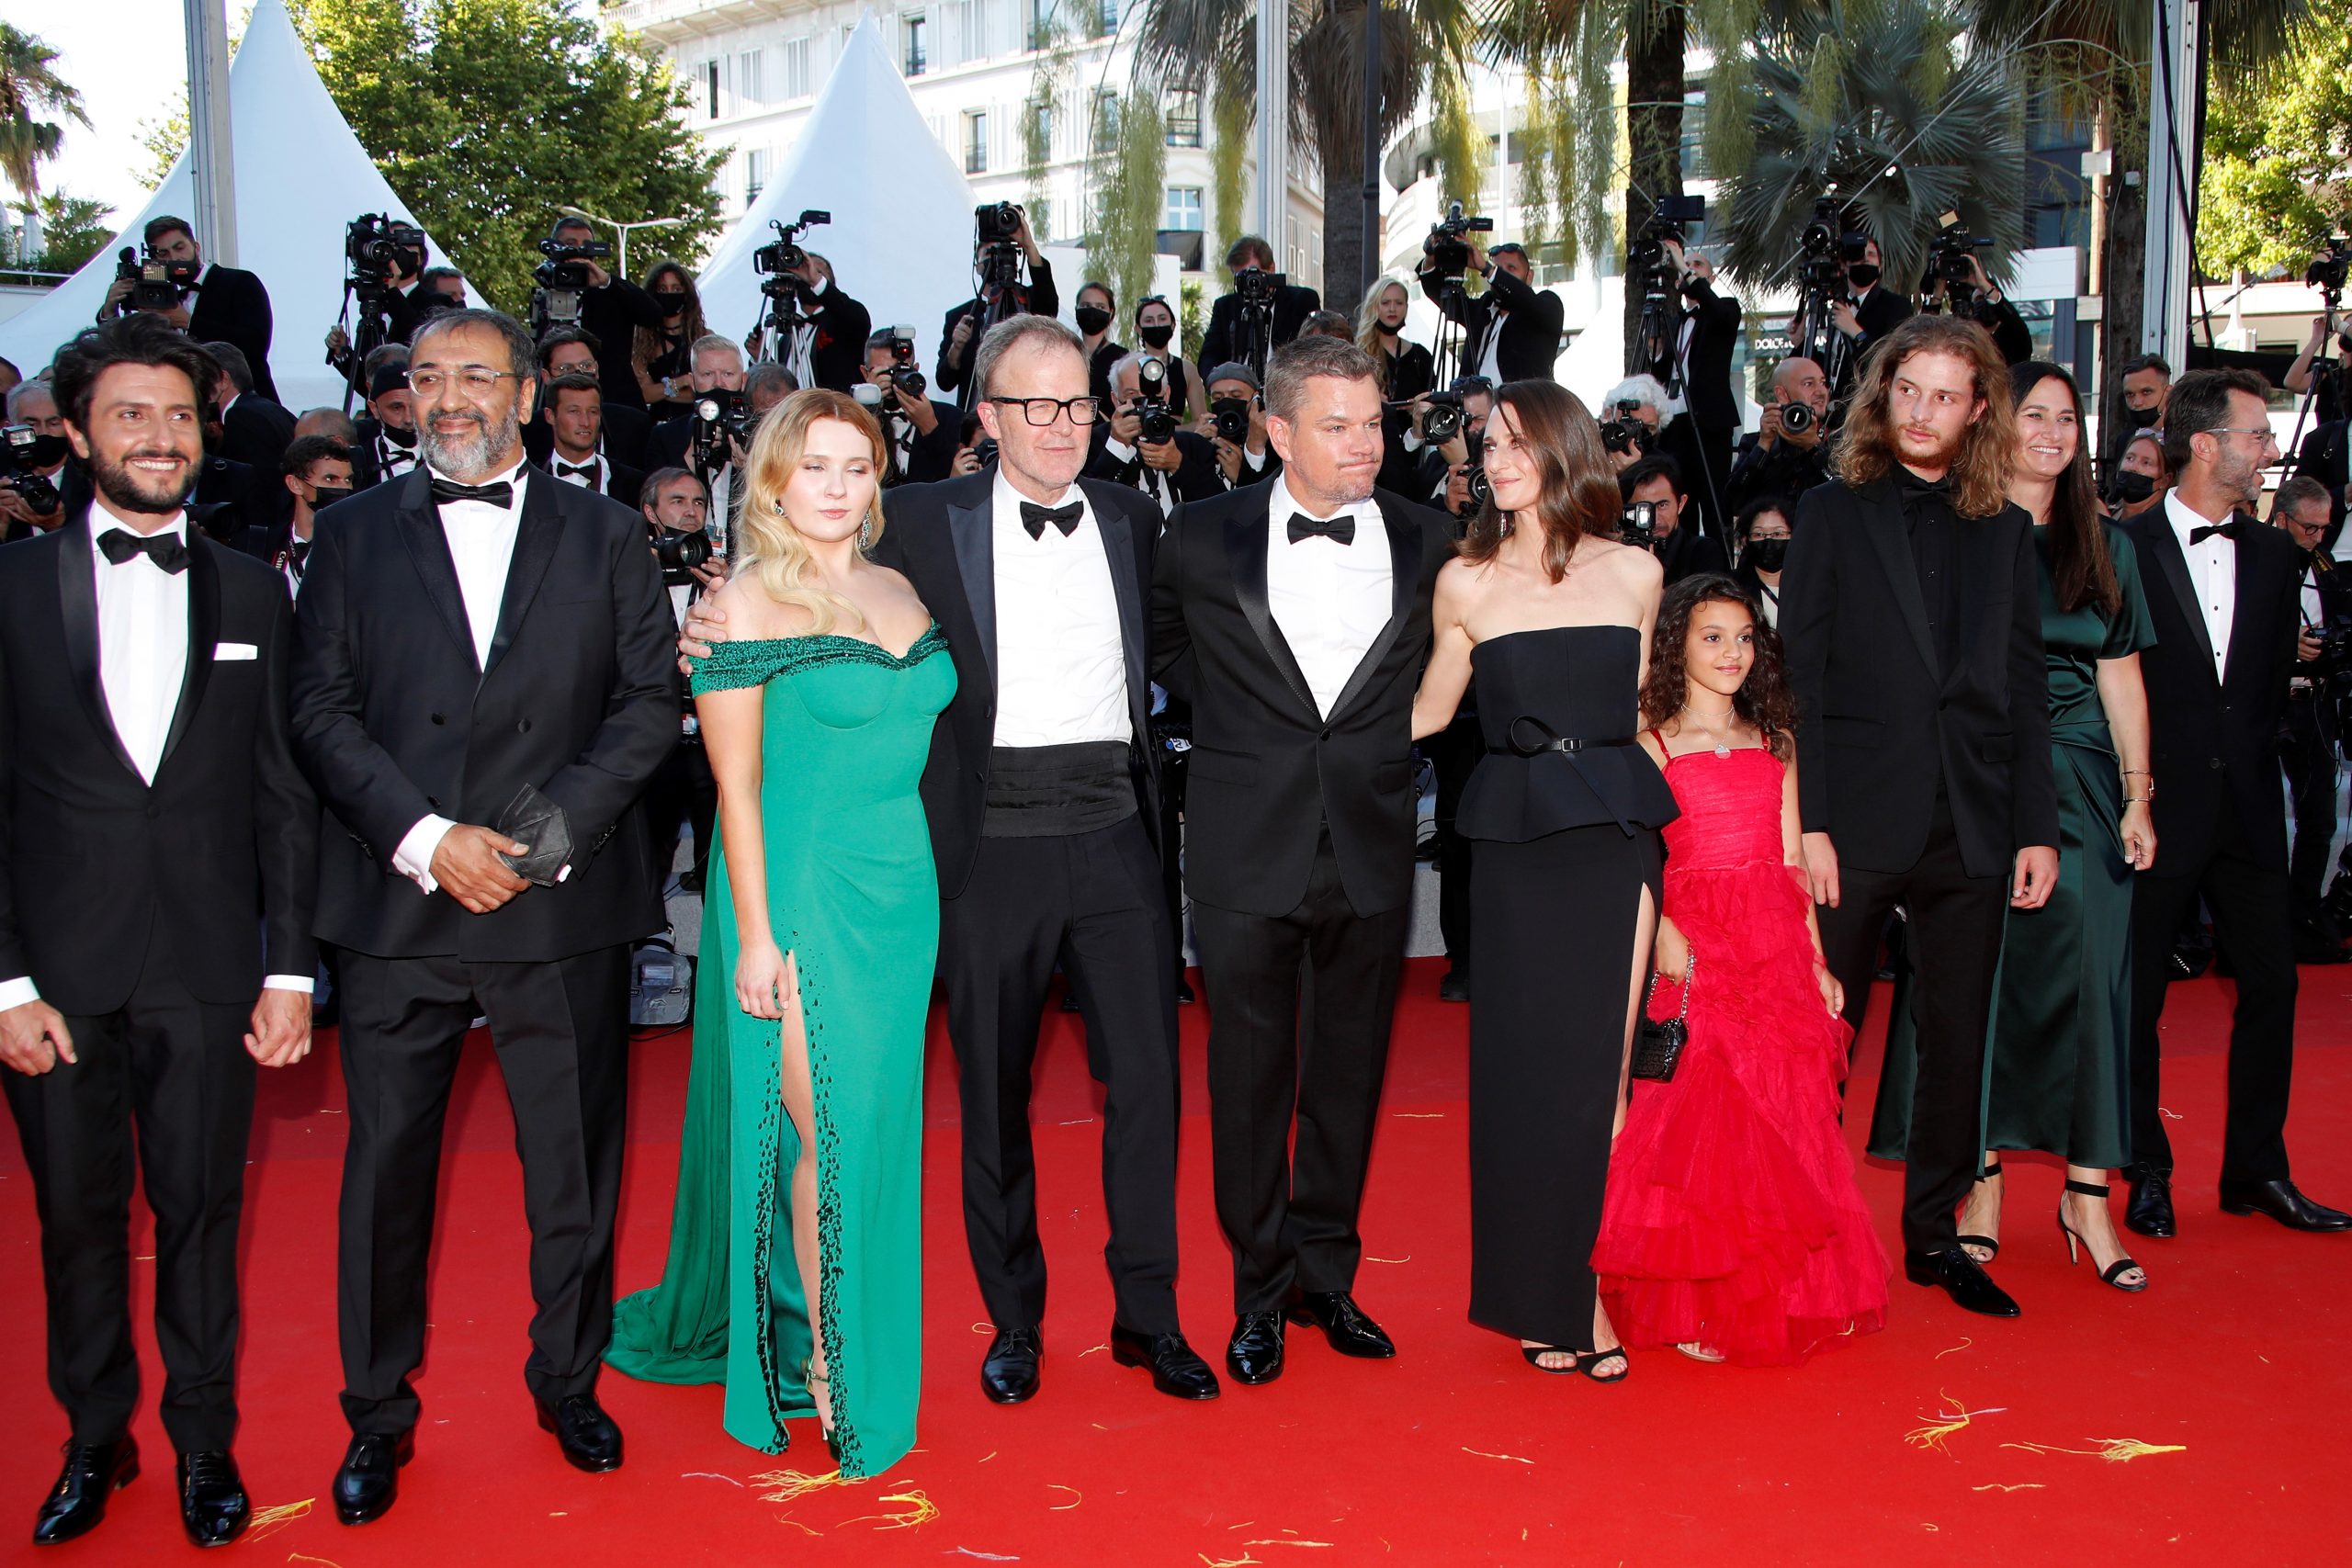 epa09332093 (L-R) Gregory di Meglio, Moussa Maaskri, Abigail Breslin, Tom Mccarthy, Matt Damon, Camille Cottin, Lilou Siauvaud, Igor Azougli arrive for the screening of 'Stillwater' during the 74th annual Cannes Film Festival, in Cannes, France, 08 July 2021. The movie is presented Out of Competition of the festival which runs from 06 to 17 July.  EPA/SEBASTIEN NOGIER